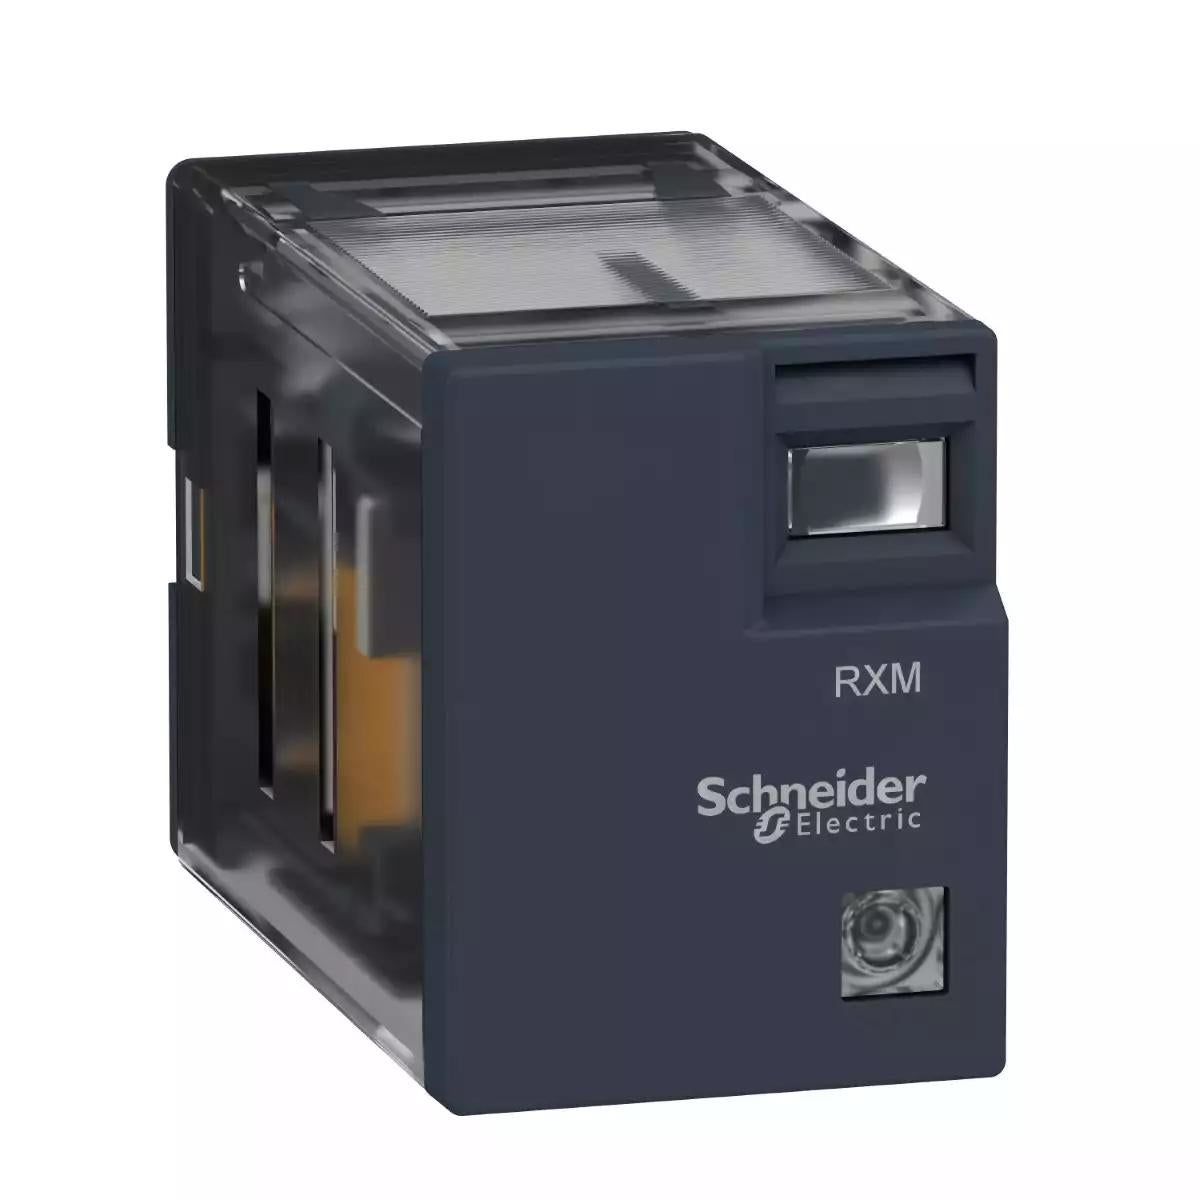 Schneider Electric Zelio RXM - Relay Miniature Plug-in relay4L - 4 C/O - 24 V DC - 3 A - with LED